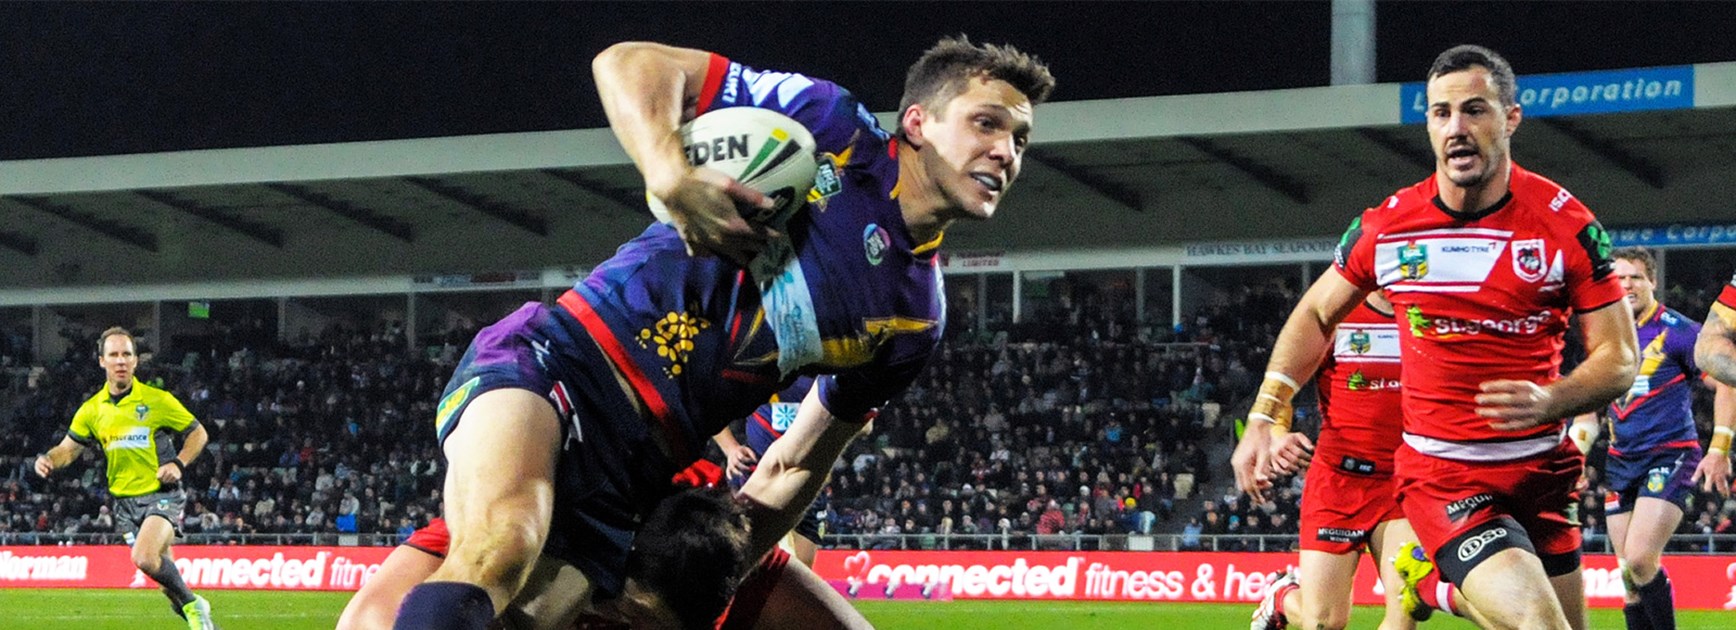 Storm winger Matt Duffie made his long-awaited return from injury against the Dragons on Saturday.